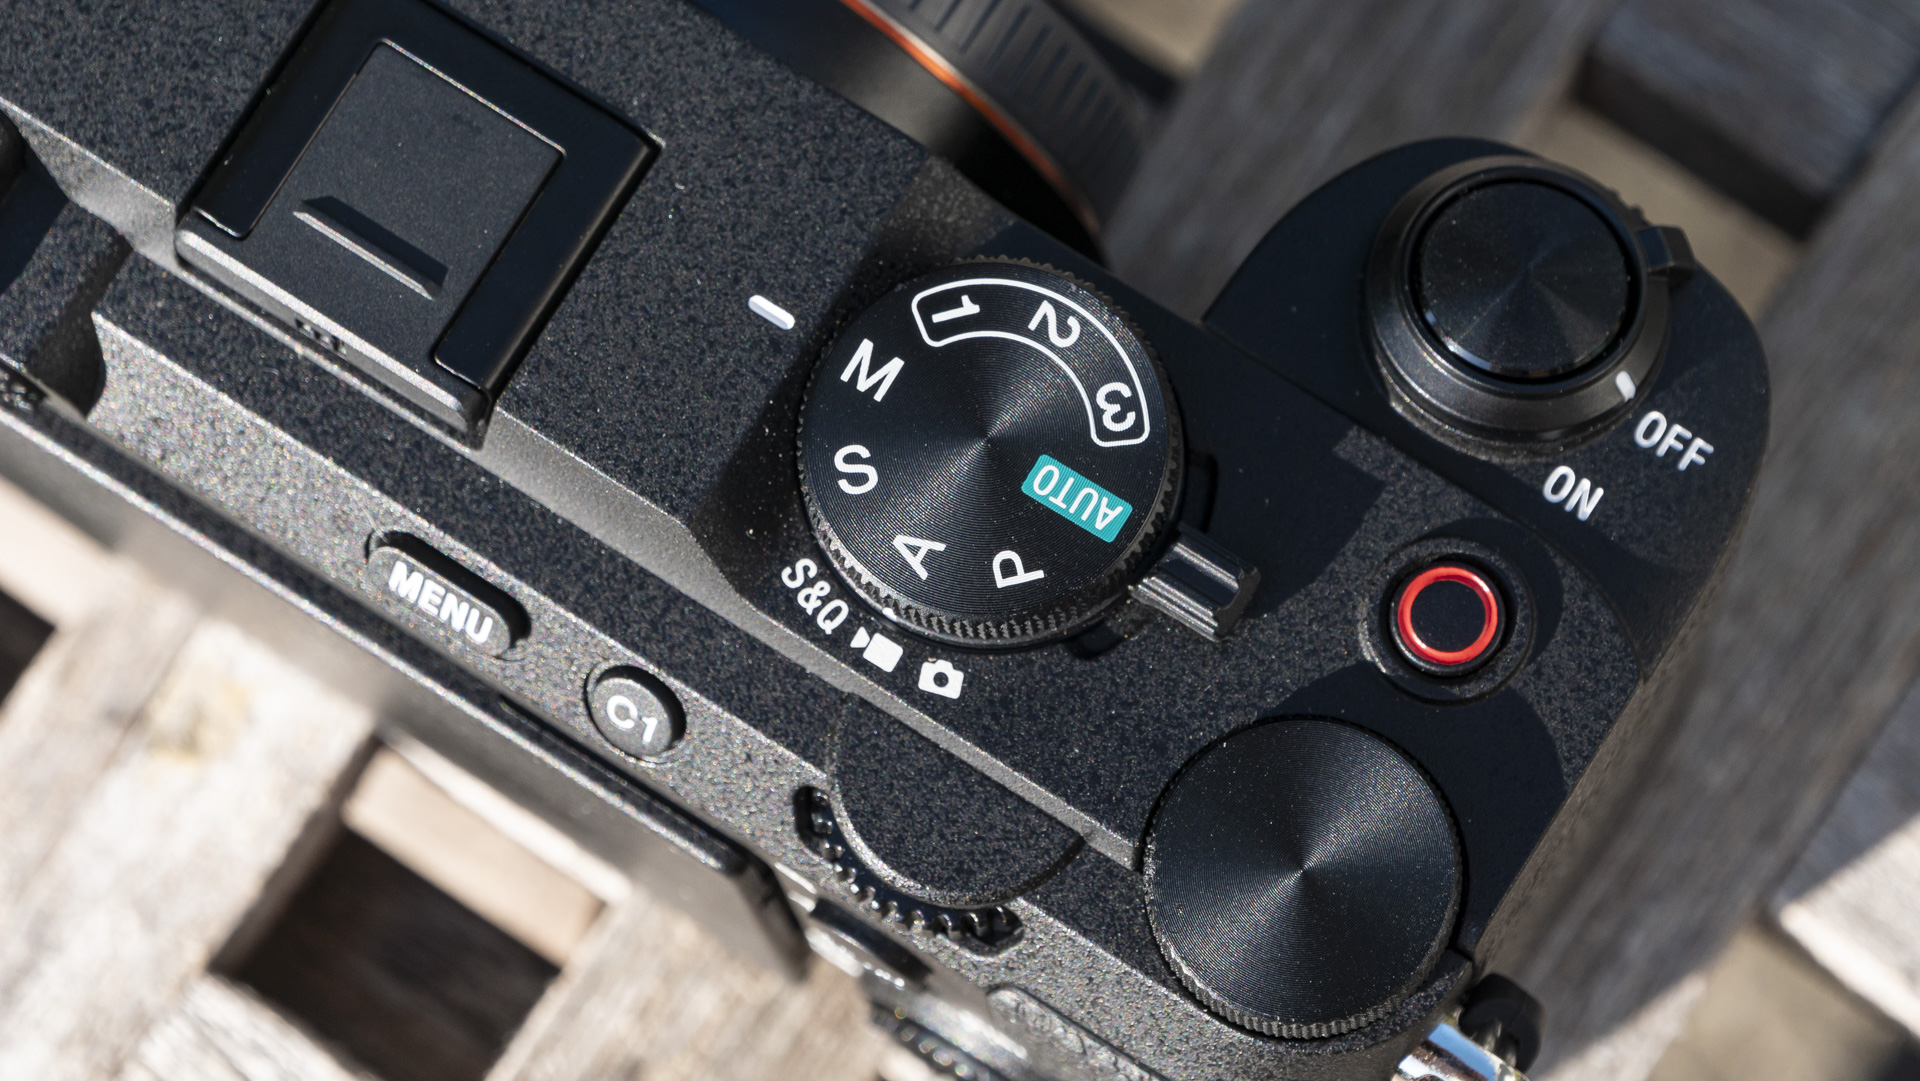 Top plate and controls of the Sony A7C R camera outside on a wooden table